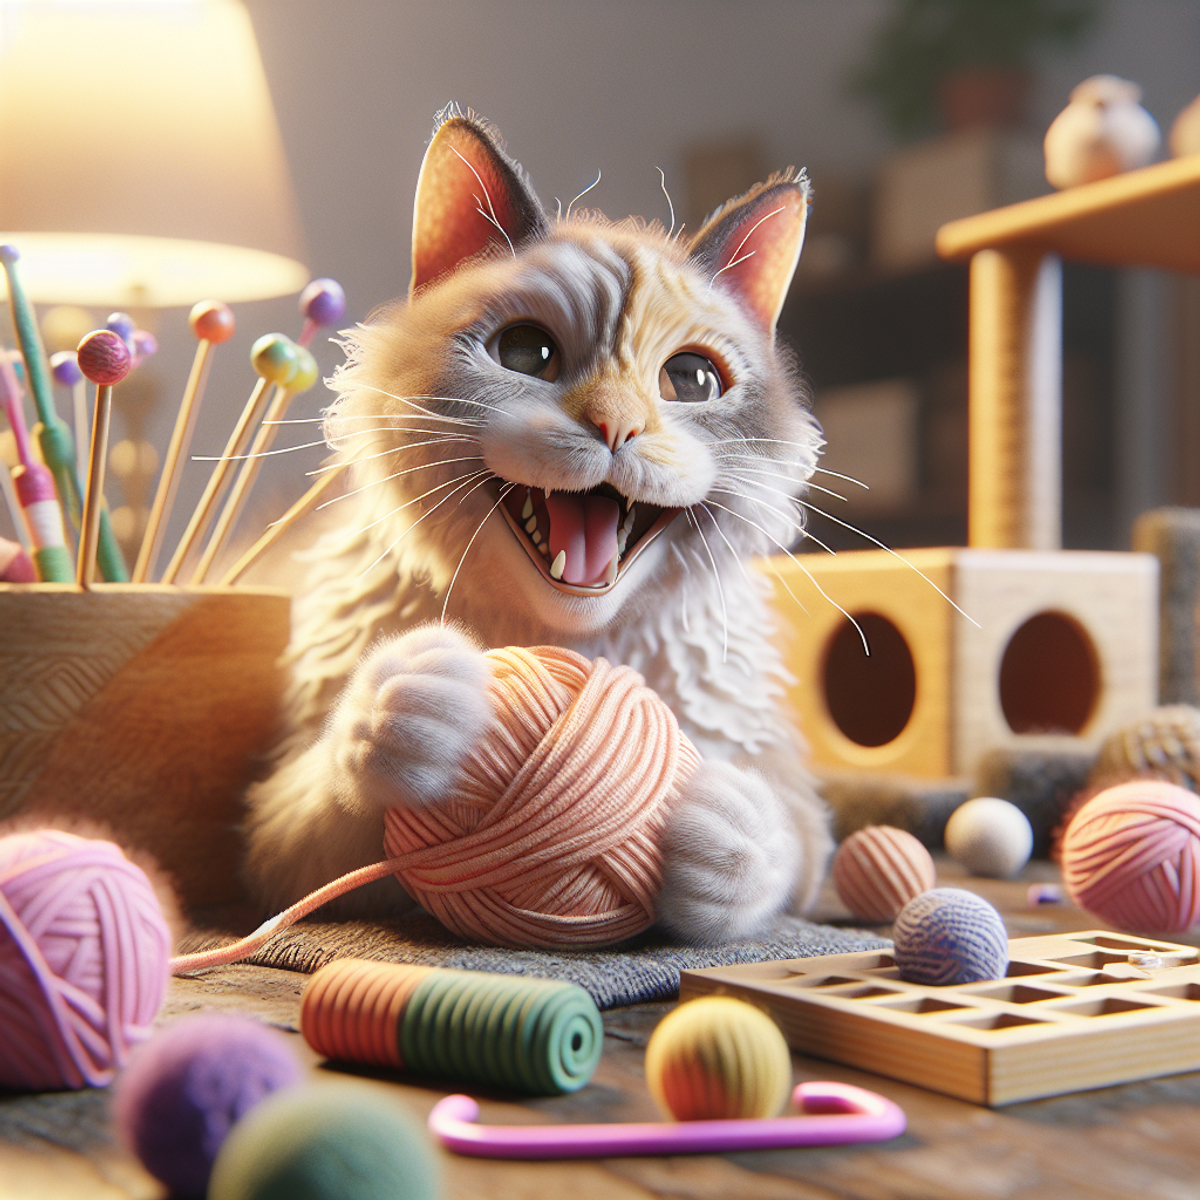 An elderly cat happily playing with a knitted yarn ball surrounded by homemade toys, including a mental stimulation puzzle toy.